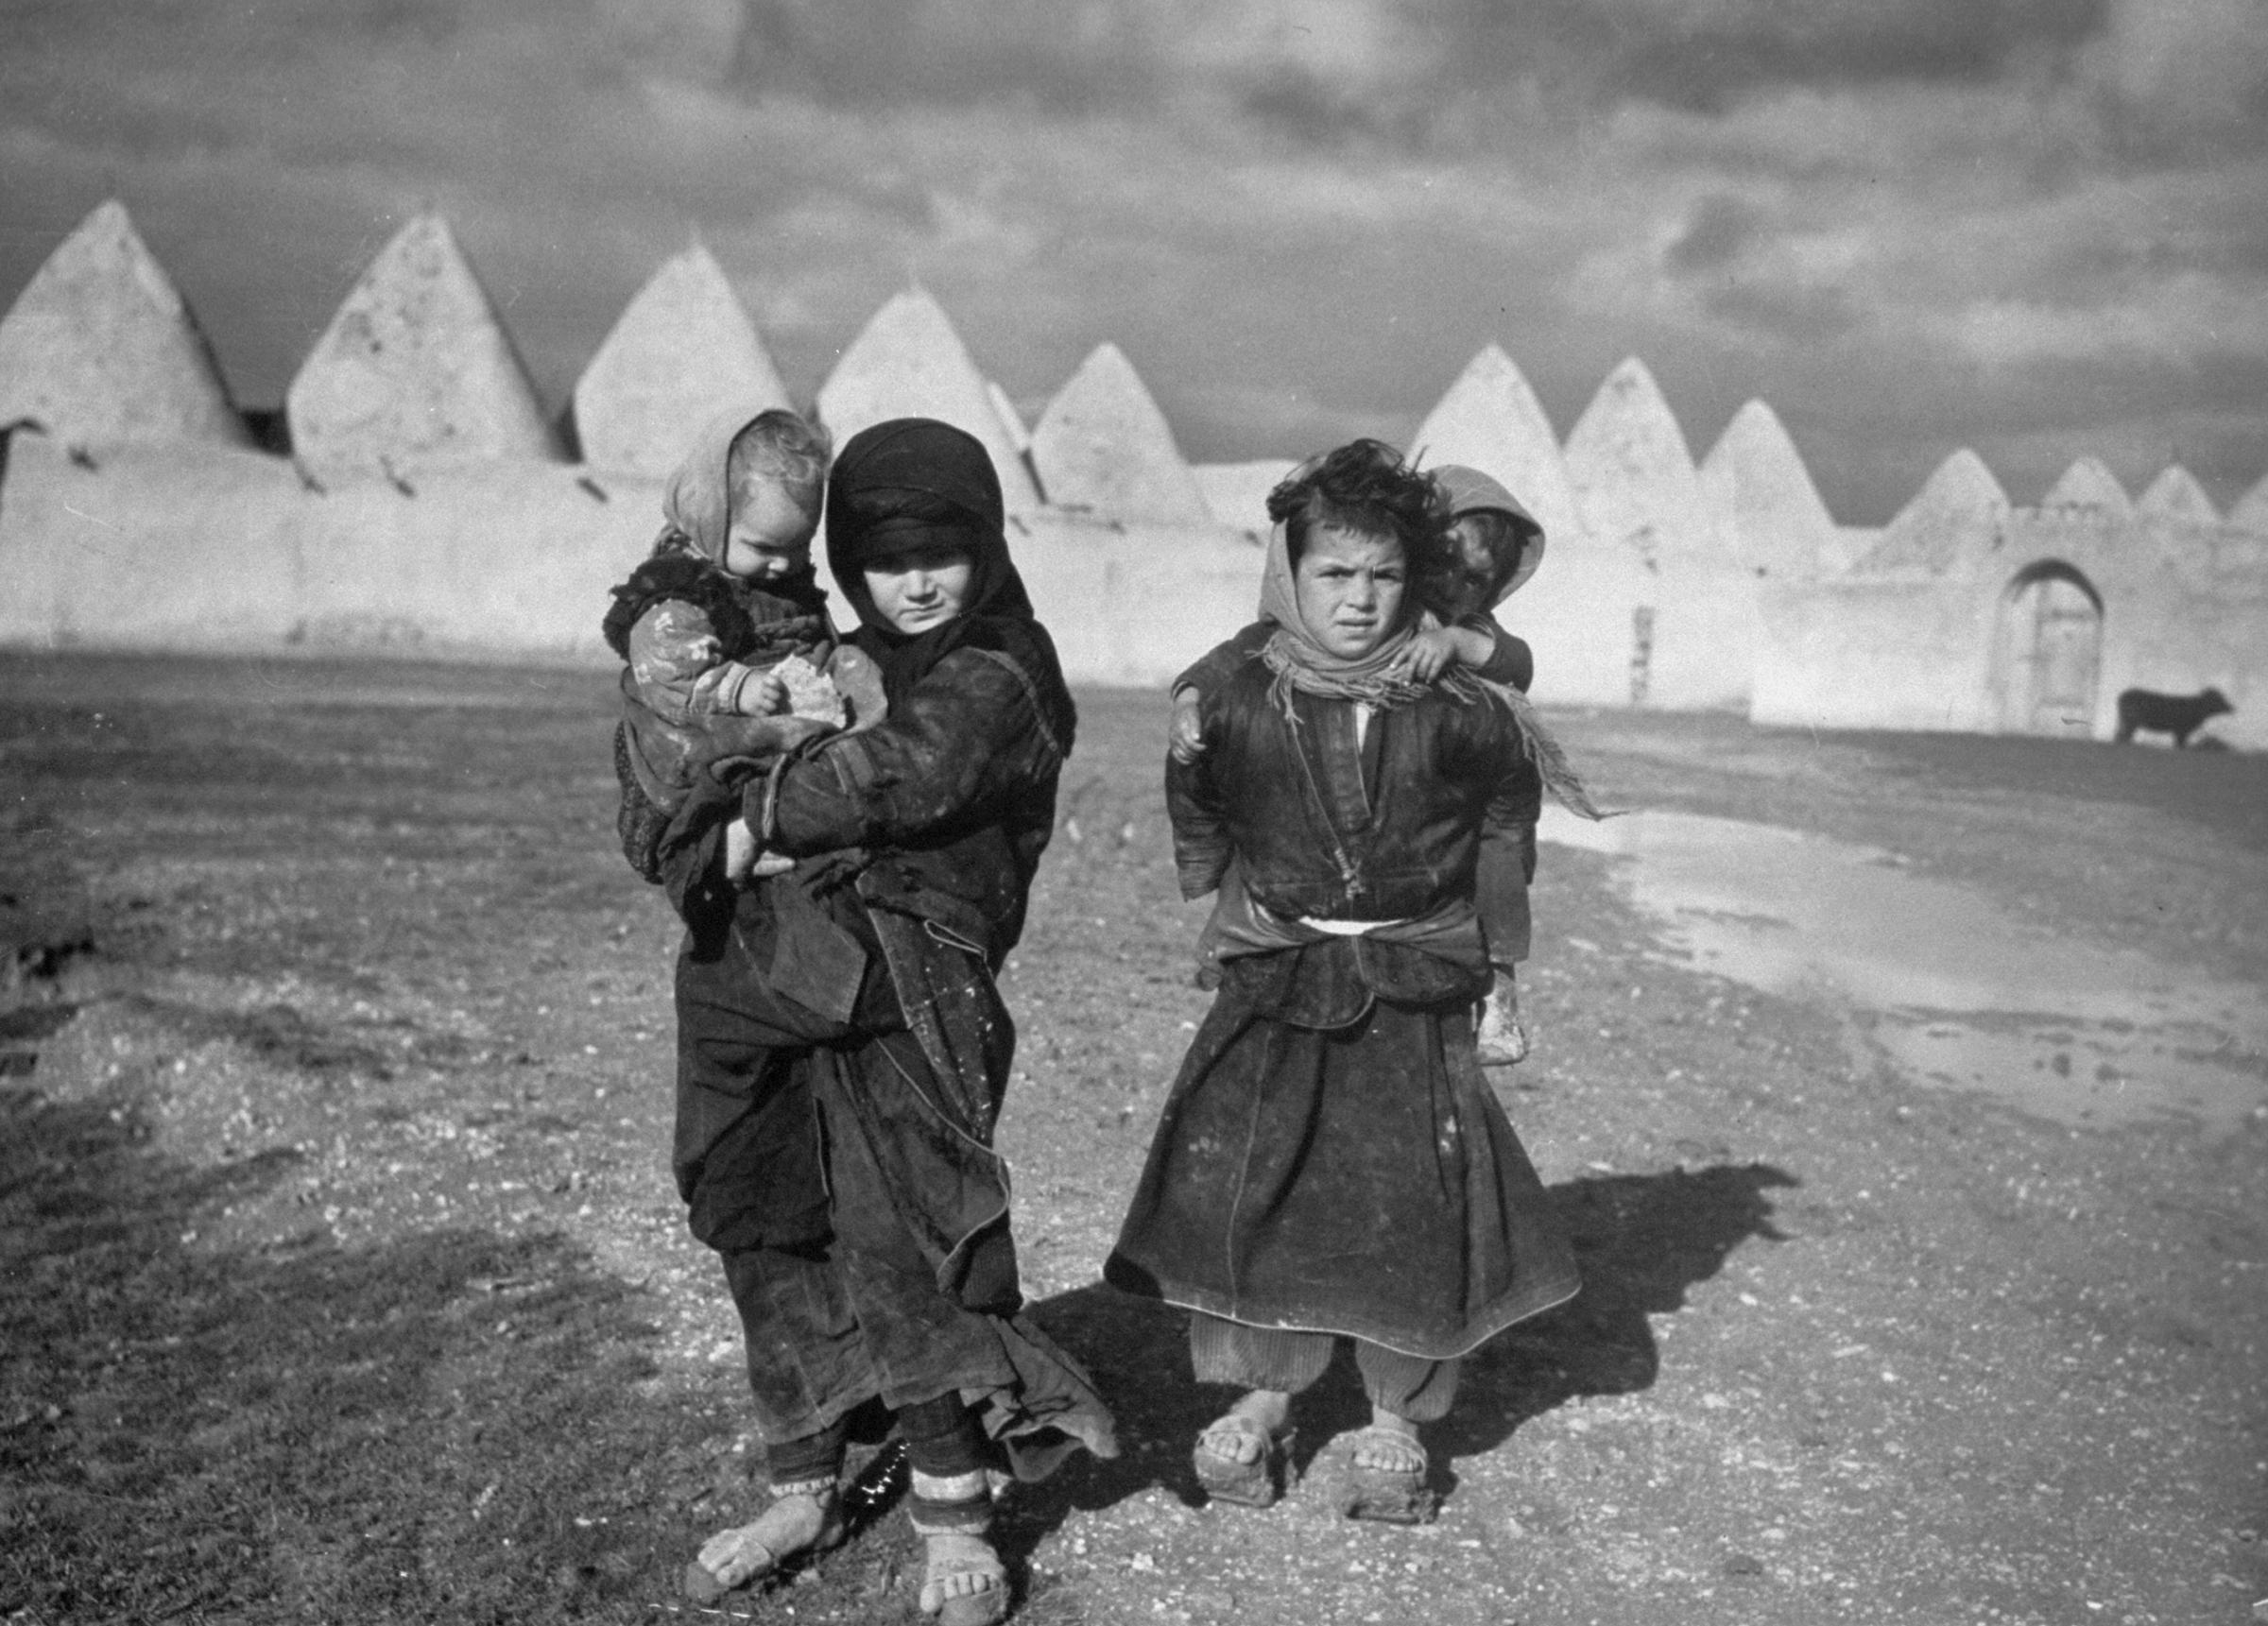 Syrian children outside the walled town of Tell Bisse, Syria, 1940.